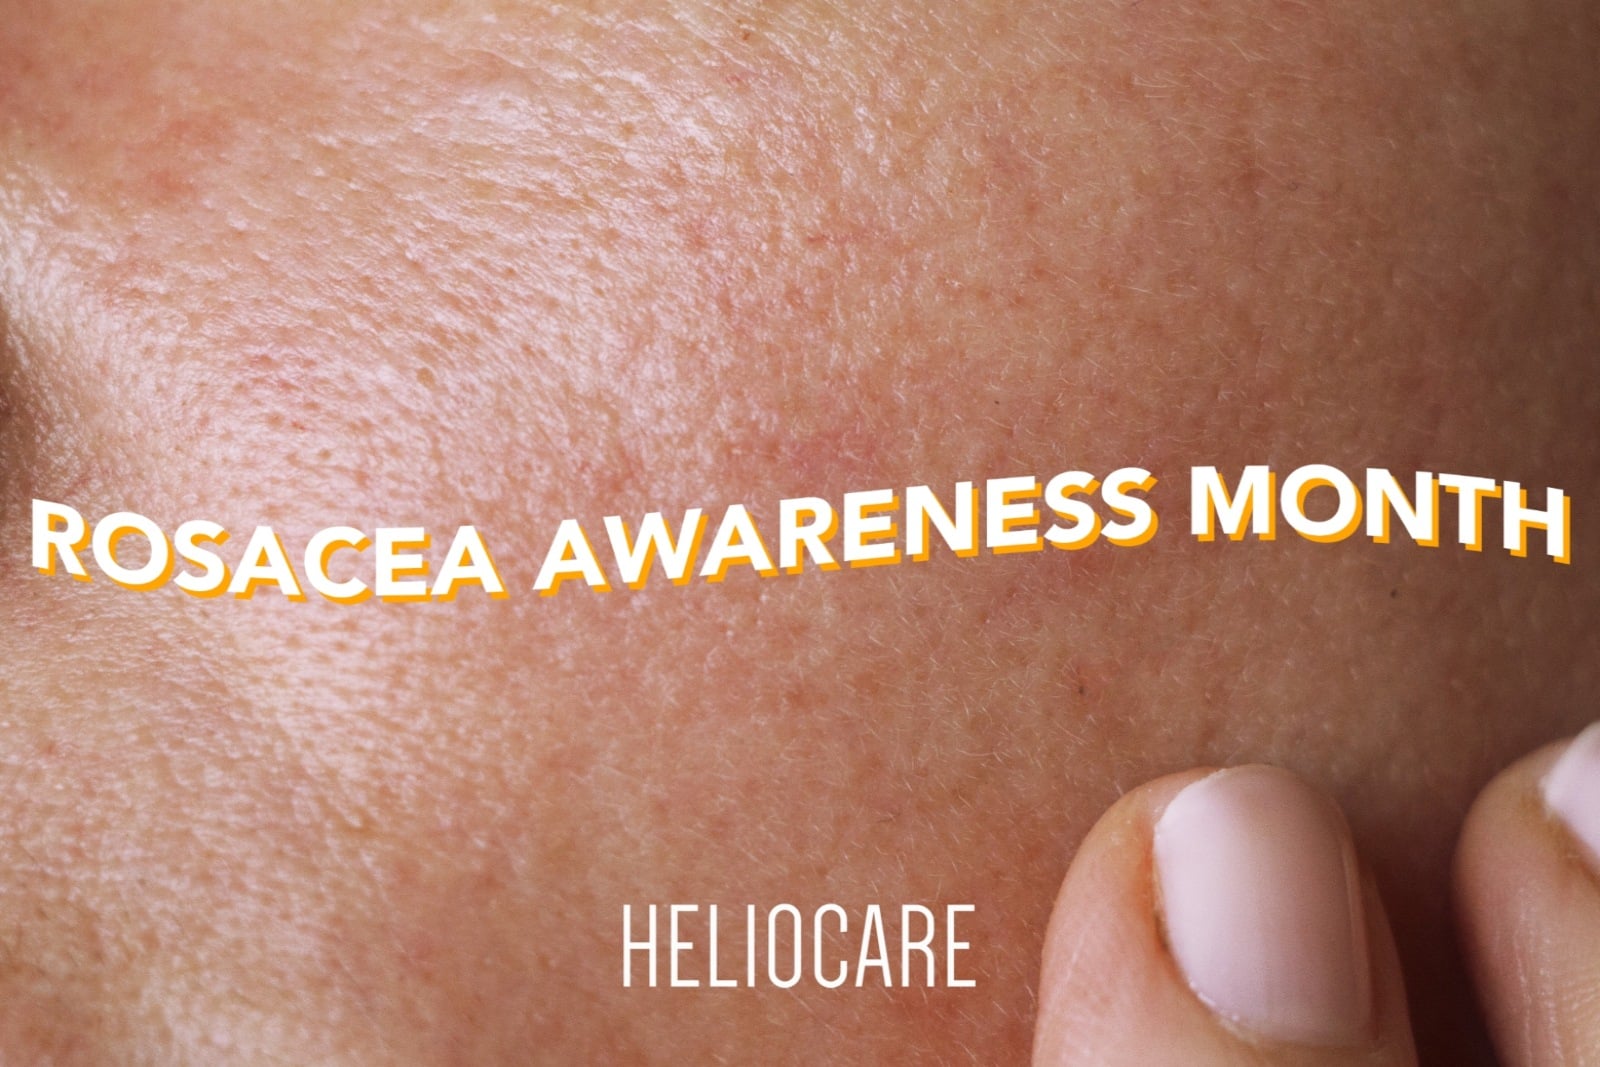 CELEBRATE ROSACEA AWARENESS MONTH WITH HELIOCARE